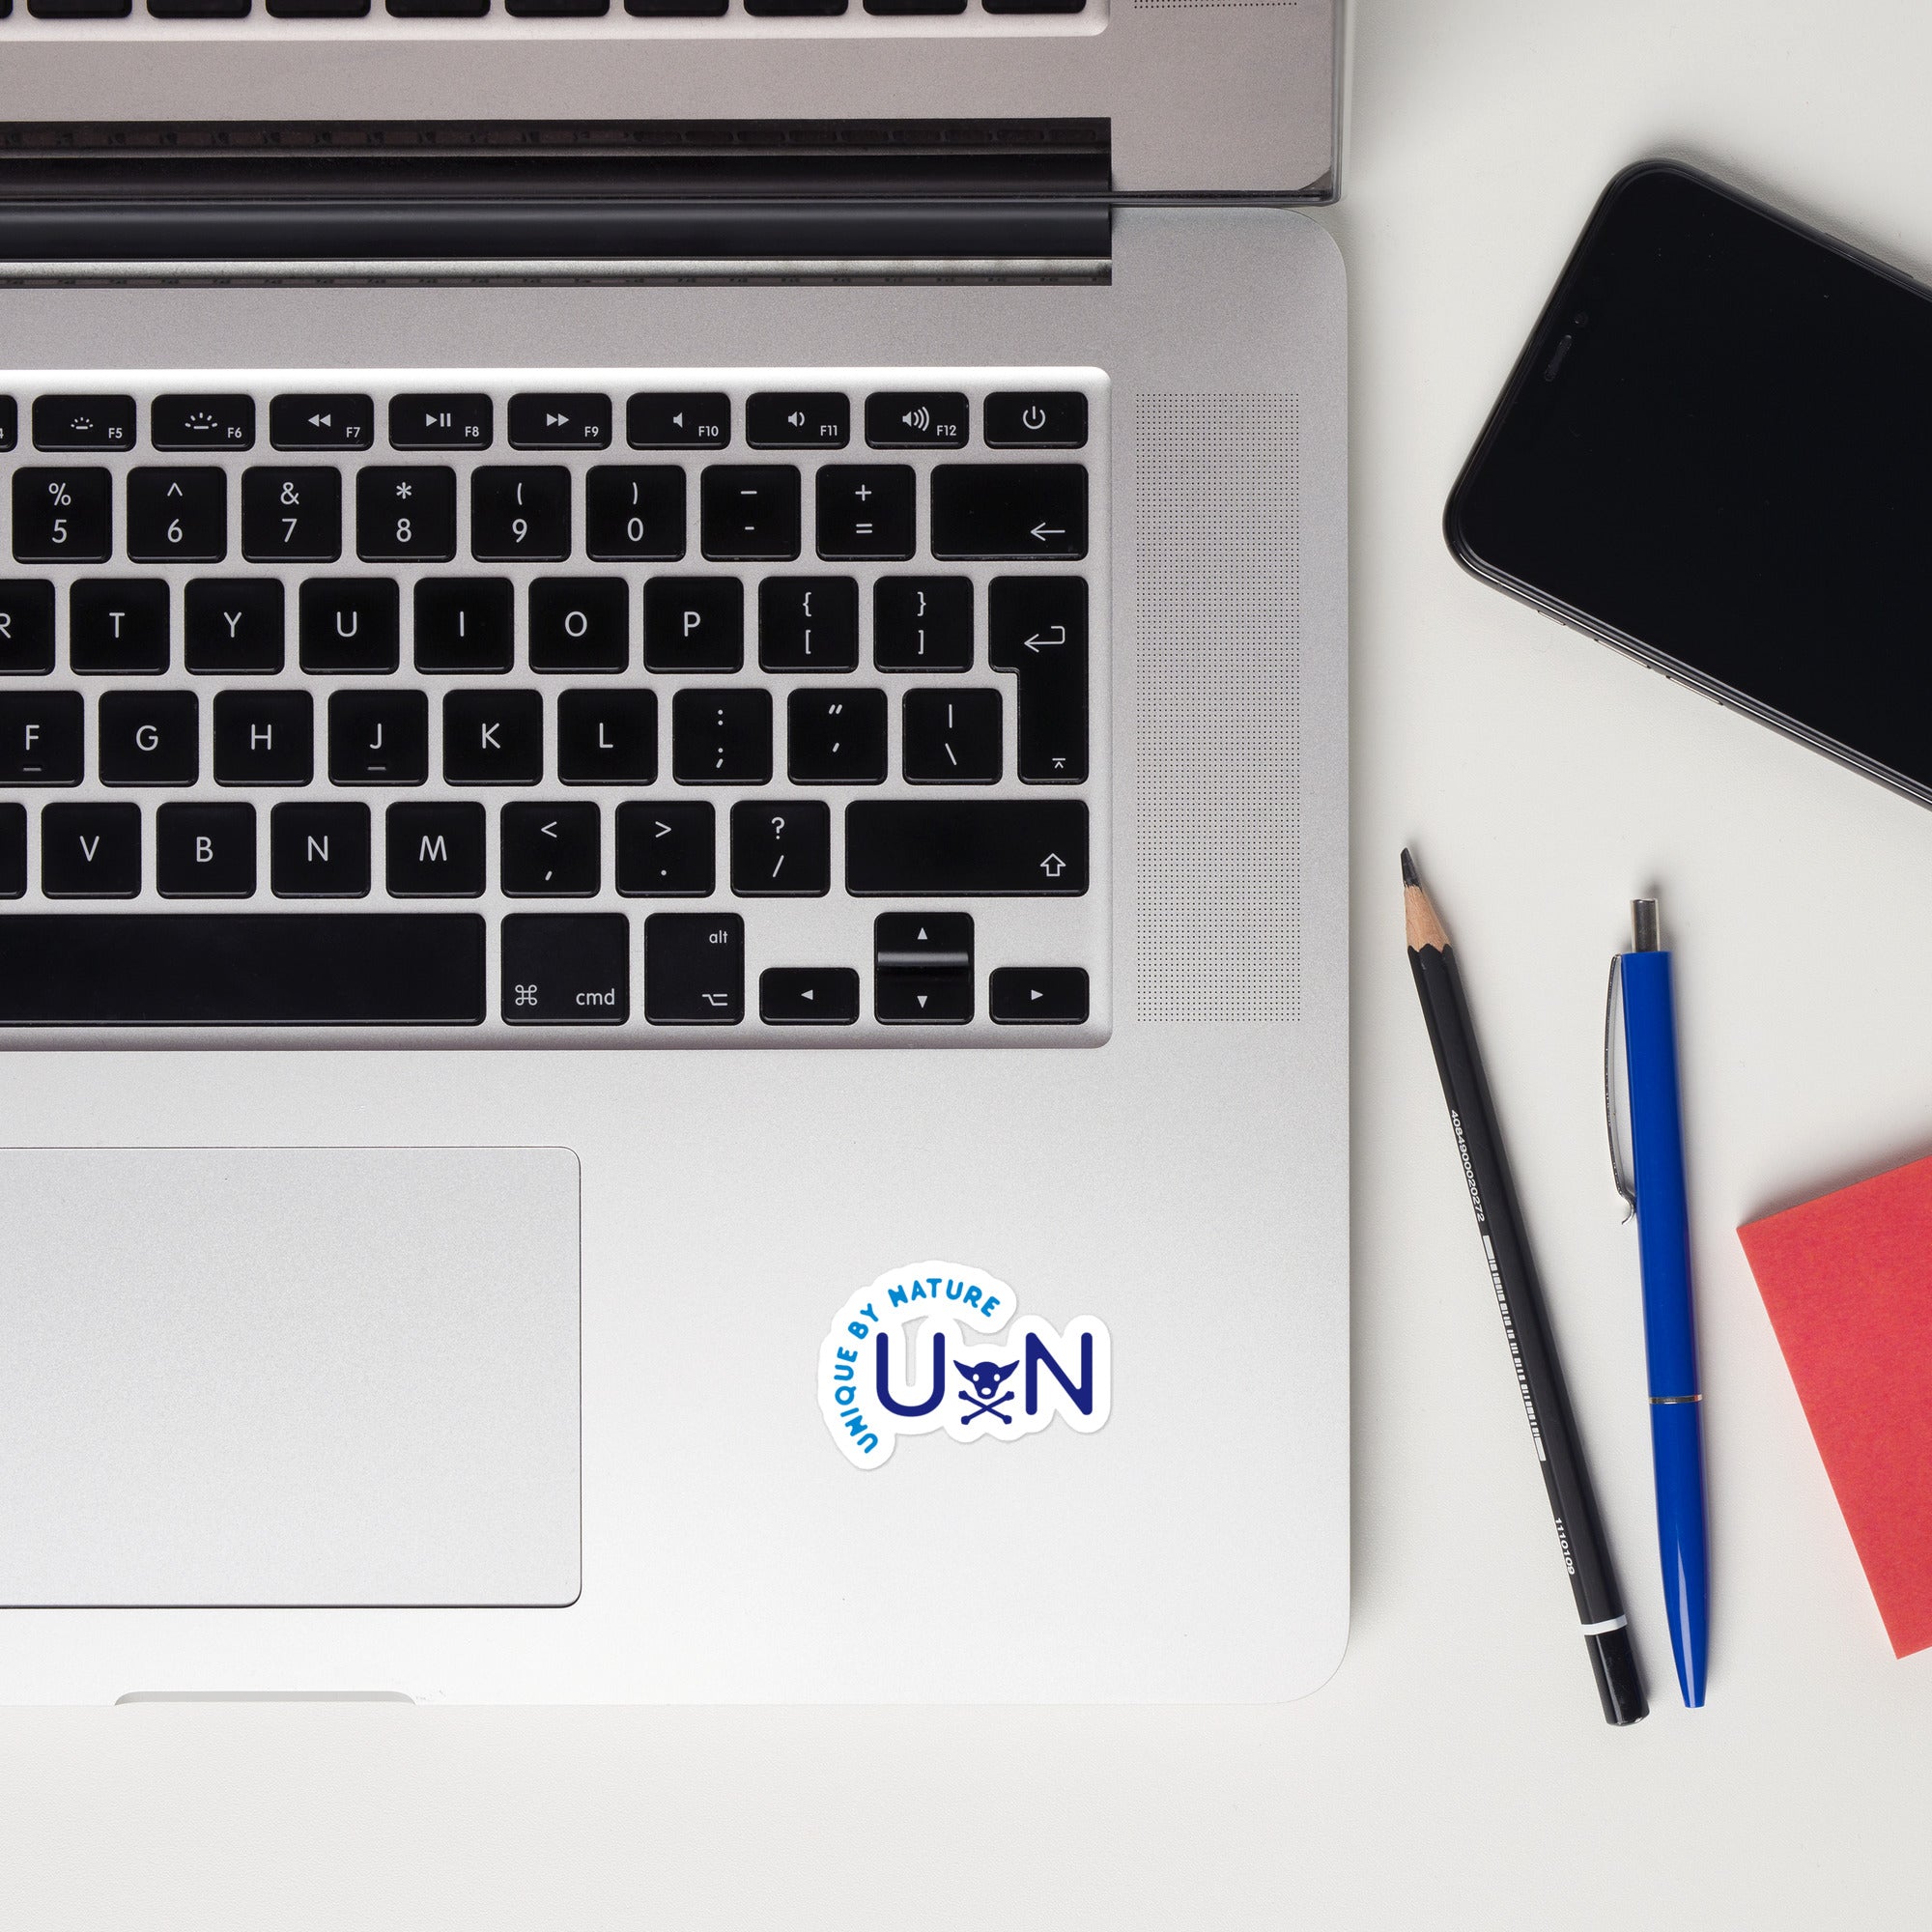 UxN stickers